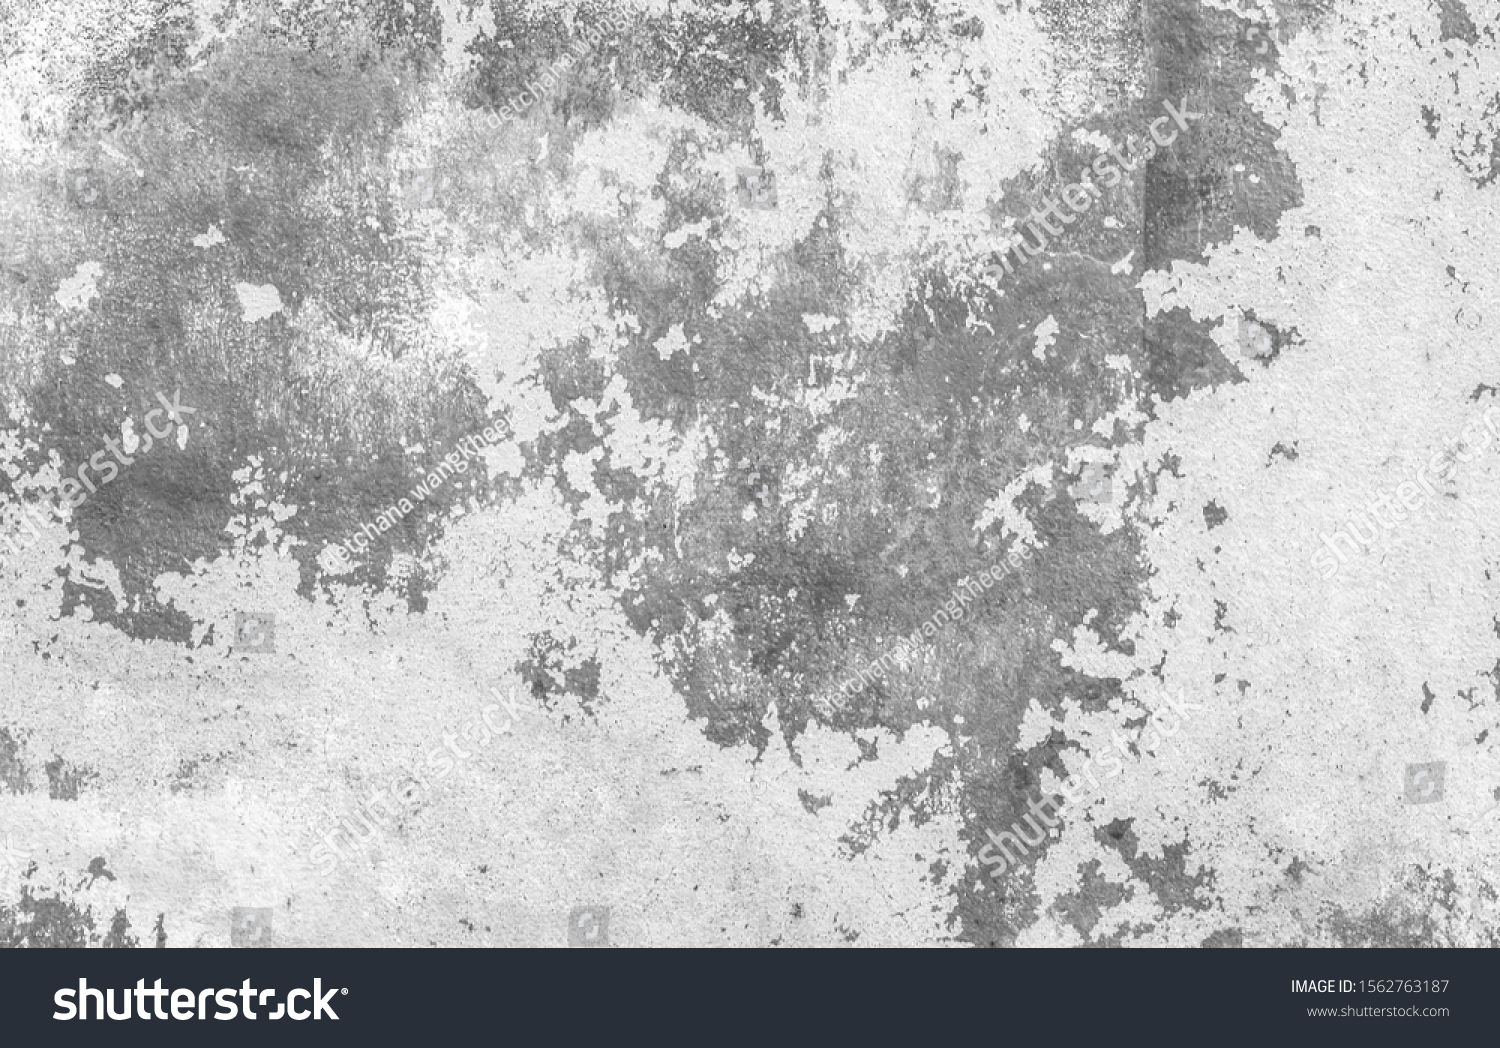 Grunge black and white abstract distress background or texture #1562763187